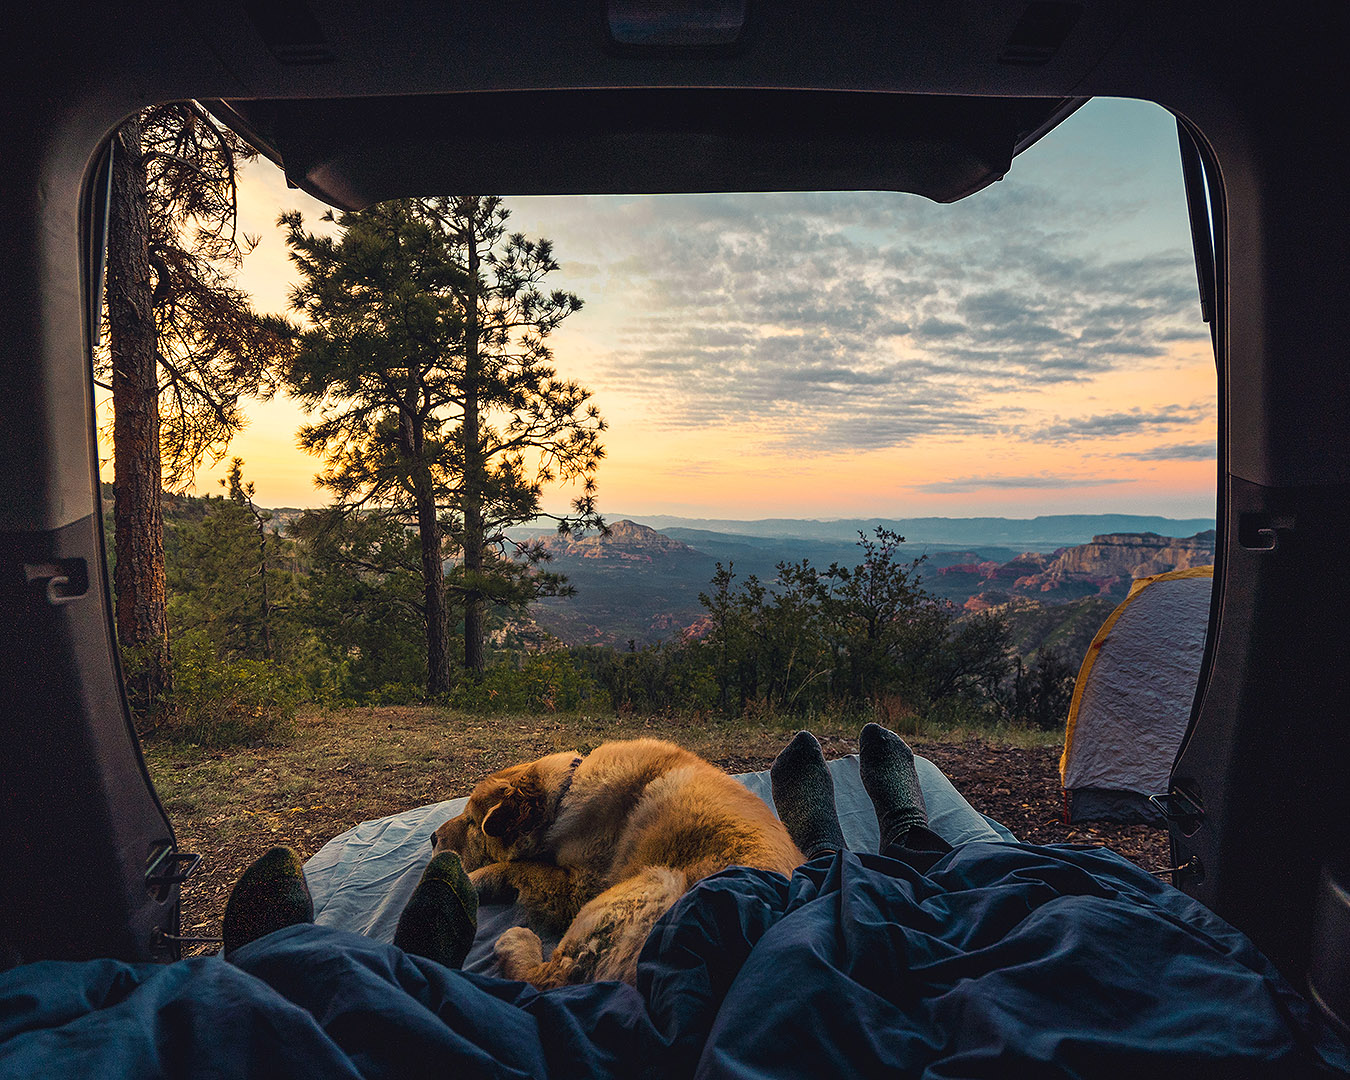 A dog is seen snoozing in the back of a campervan.